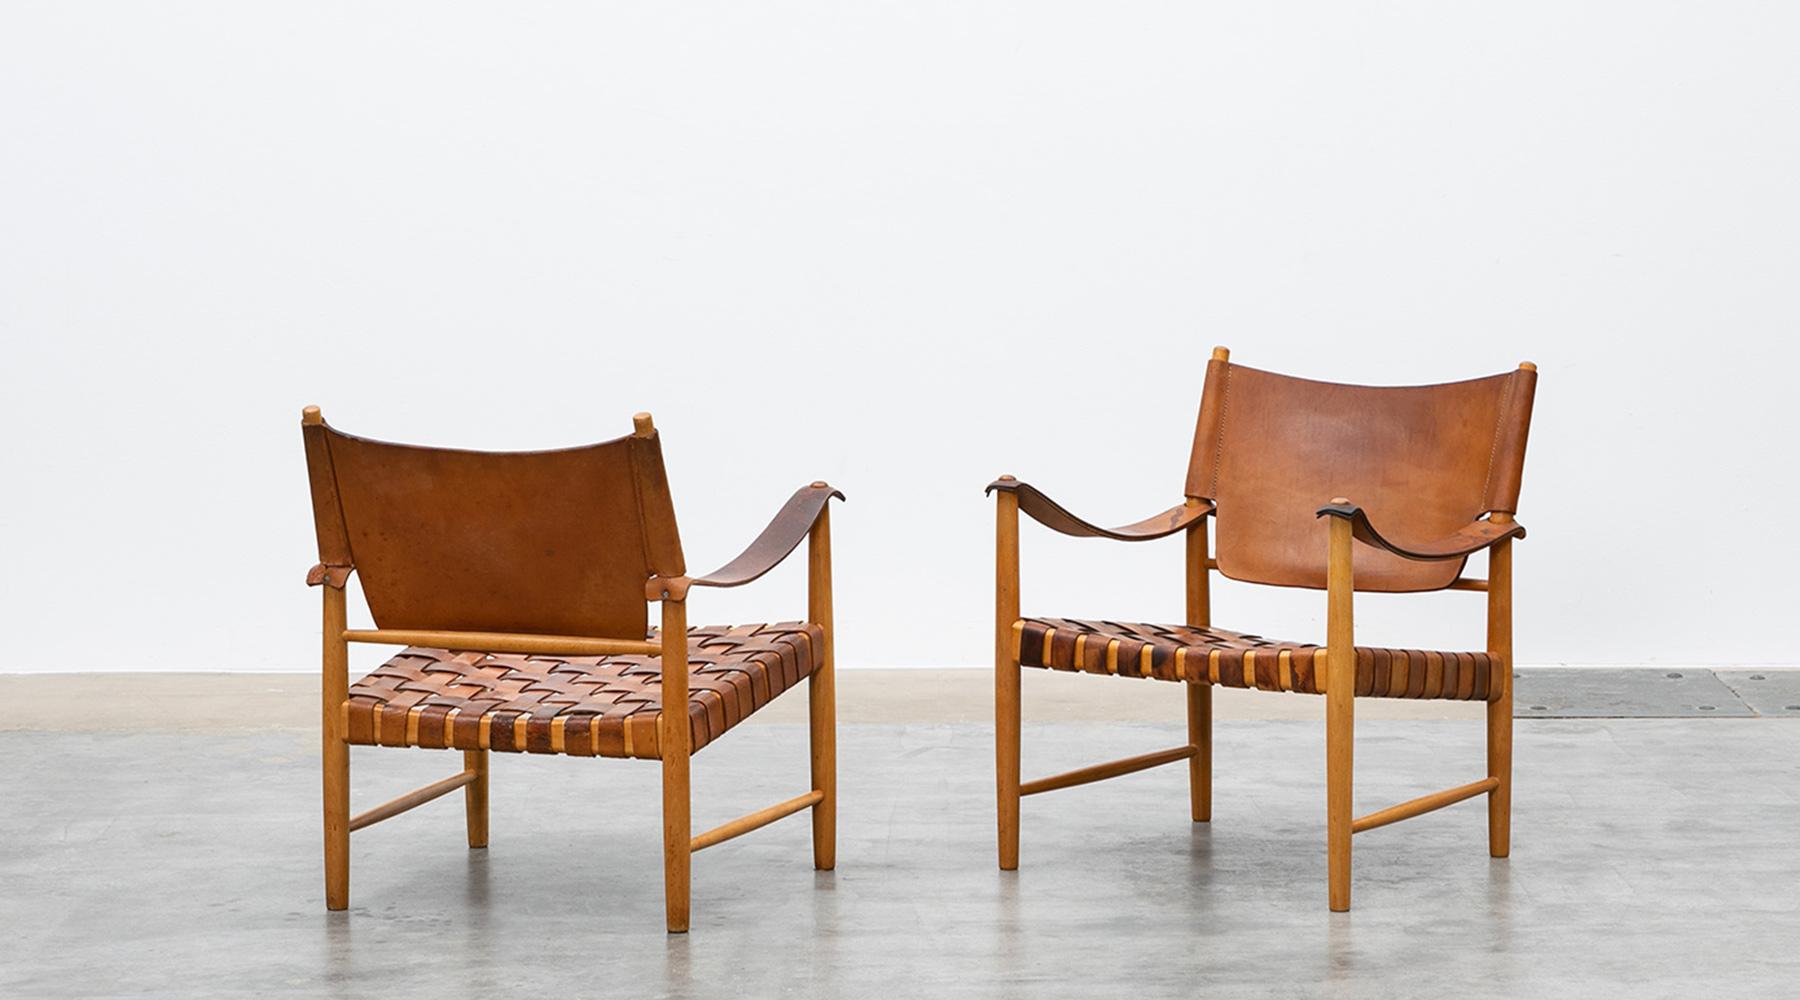 Safari lounge chairs in oak, patinated leather, Denmark, 1955.

Danish Safari lounge chairs combines leather and oak. With its organic form the lounge chairs unites construction and material. The seat and back comes in patinated leather, and as